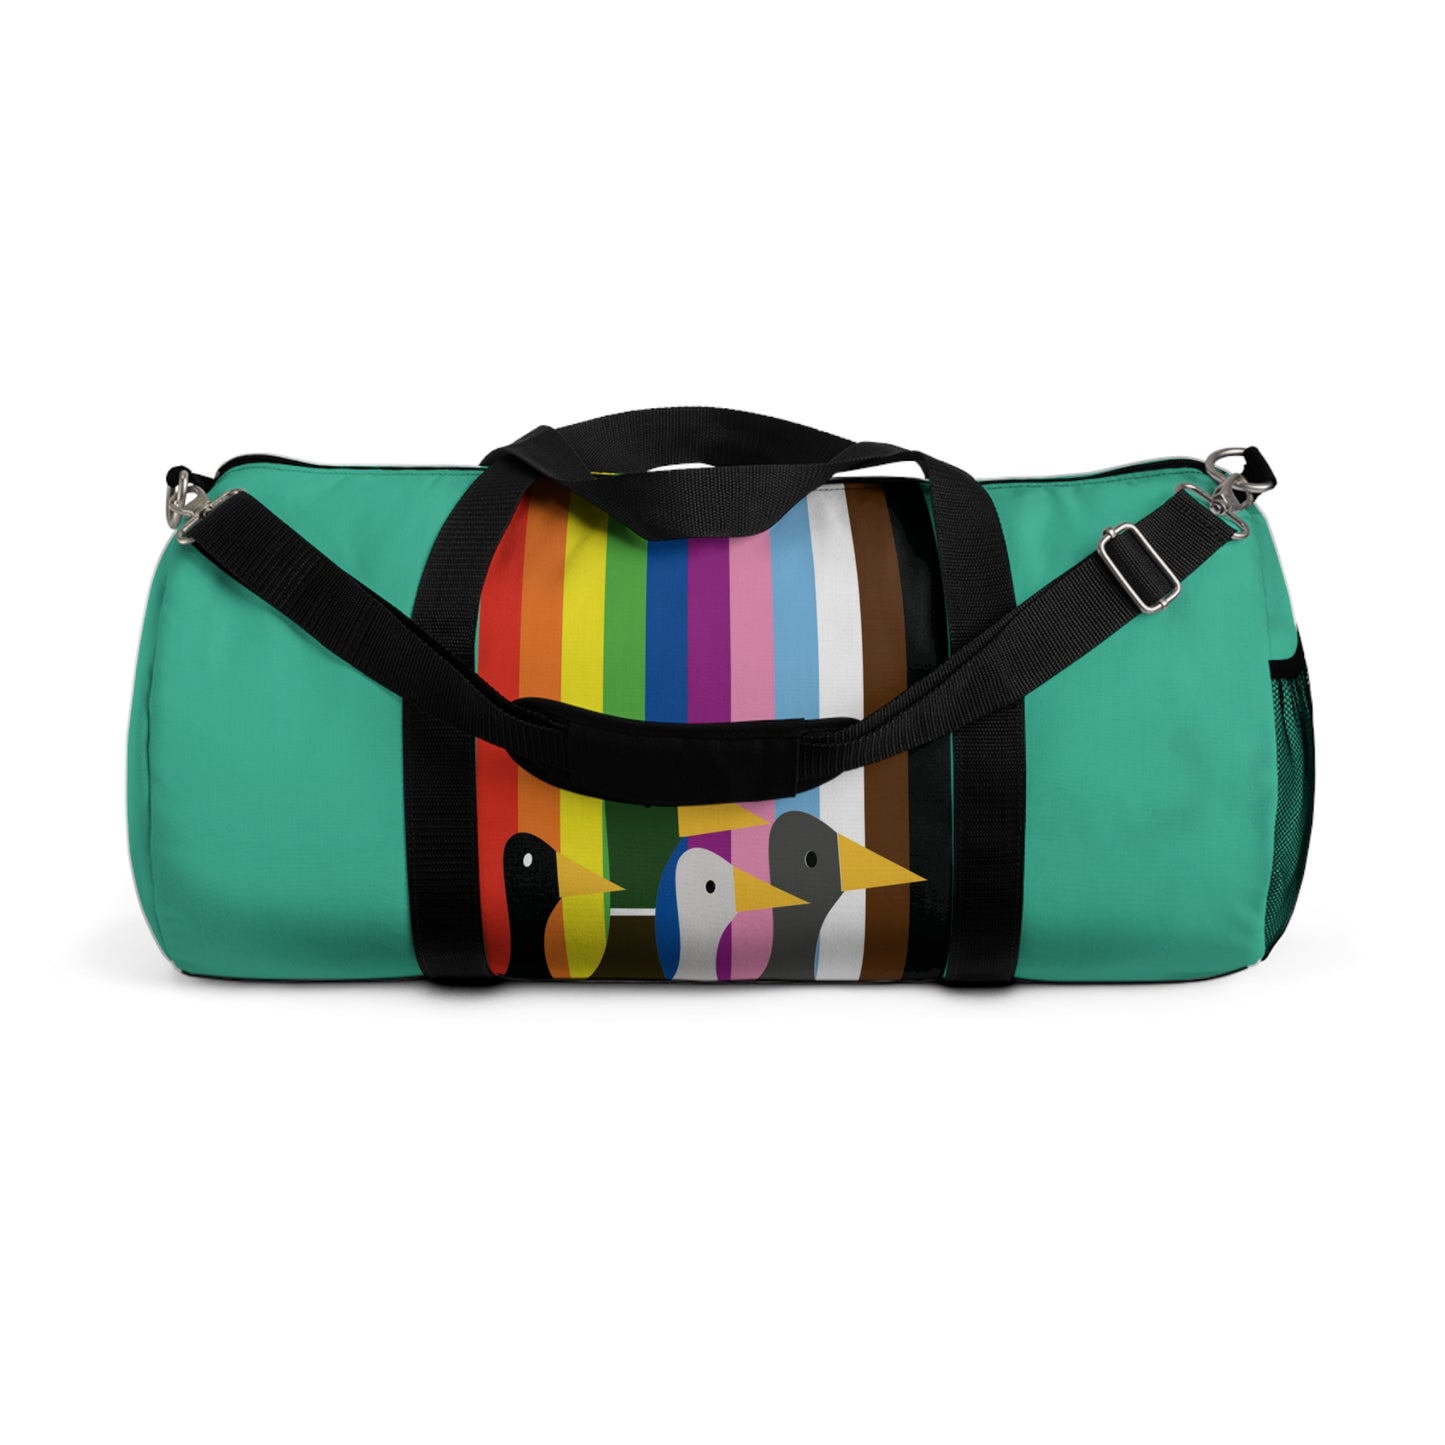 Bring the Ducks with you - Turquoise 12d3ad - Duffel Bag